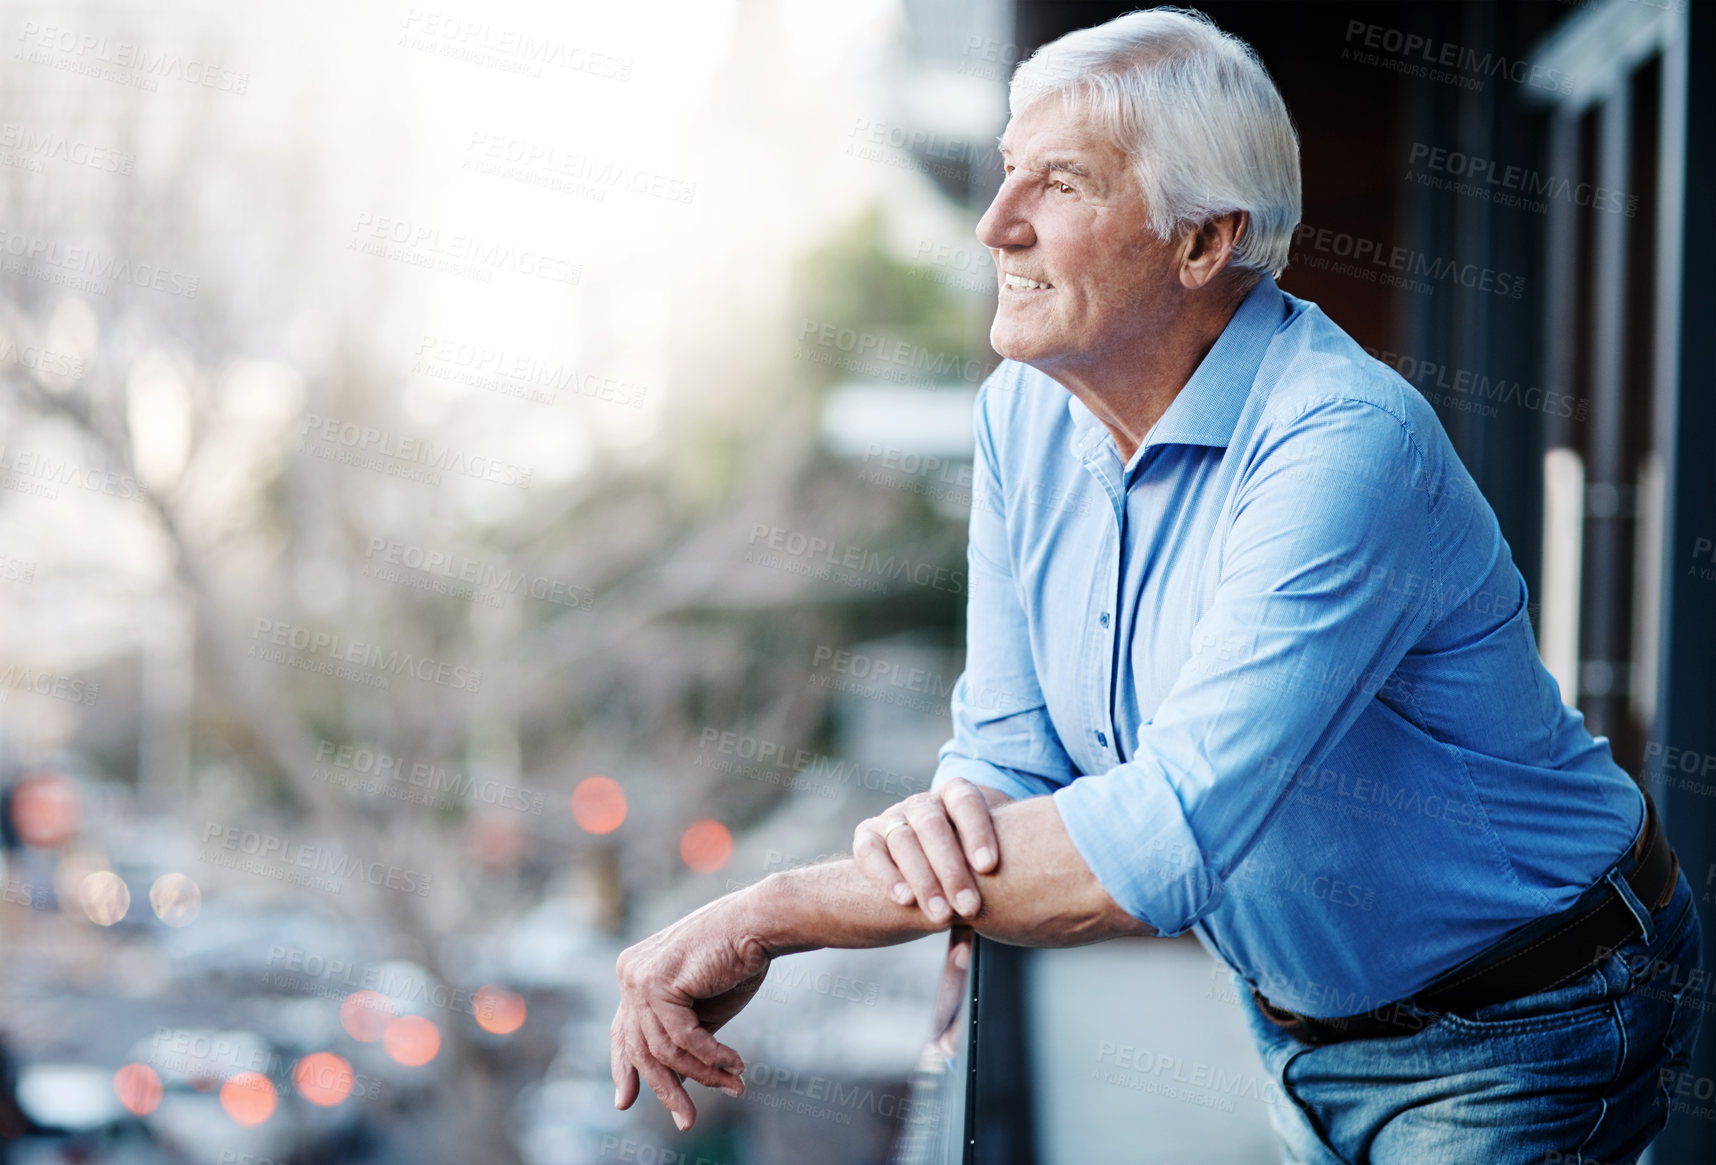 Buy stock photo Cropped shot of a senior businessman outside the office looking at the city